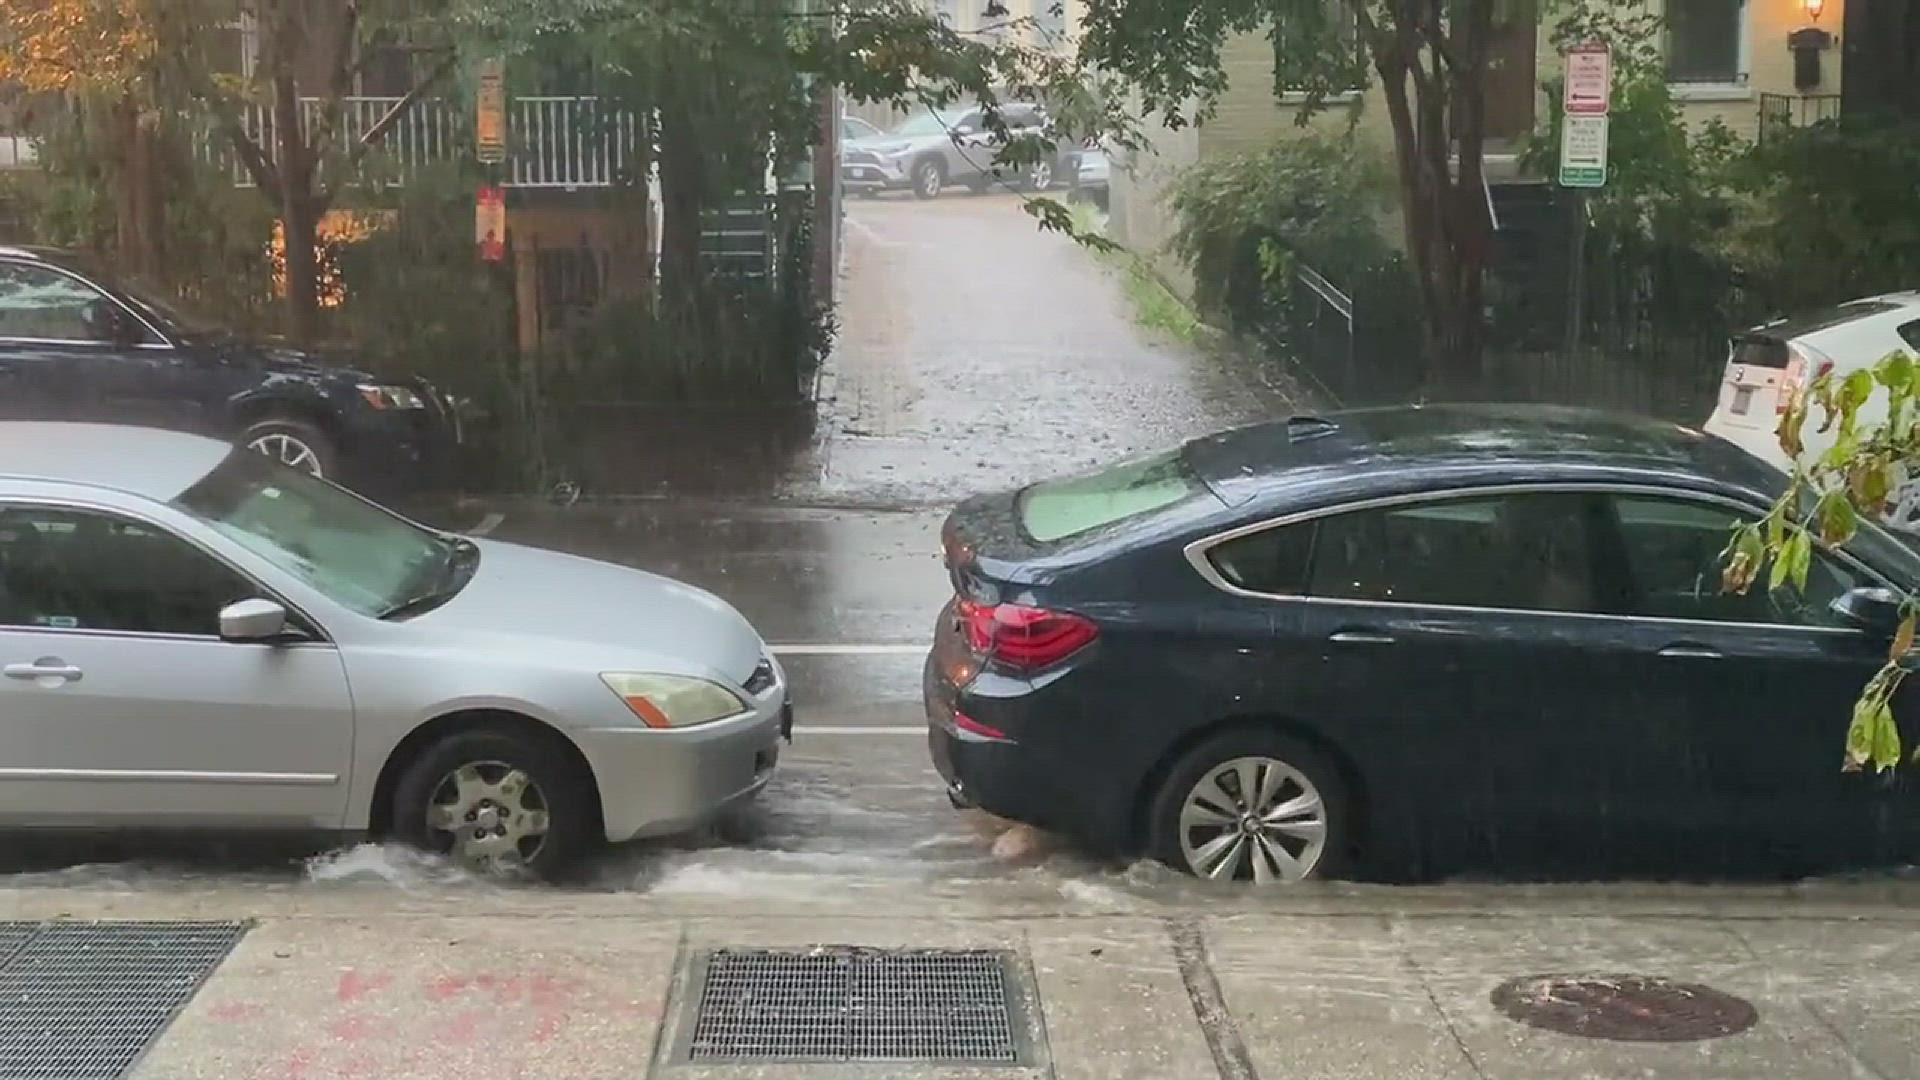 Flooding on 17th Street in Dupton NW DC
CREDIT: @MUlizawithaSEUM